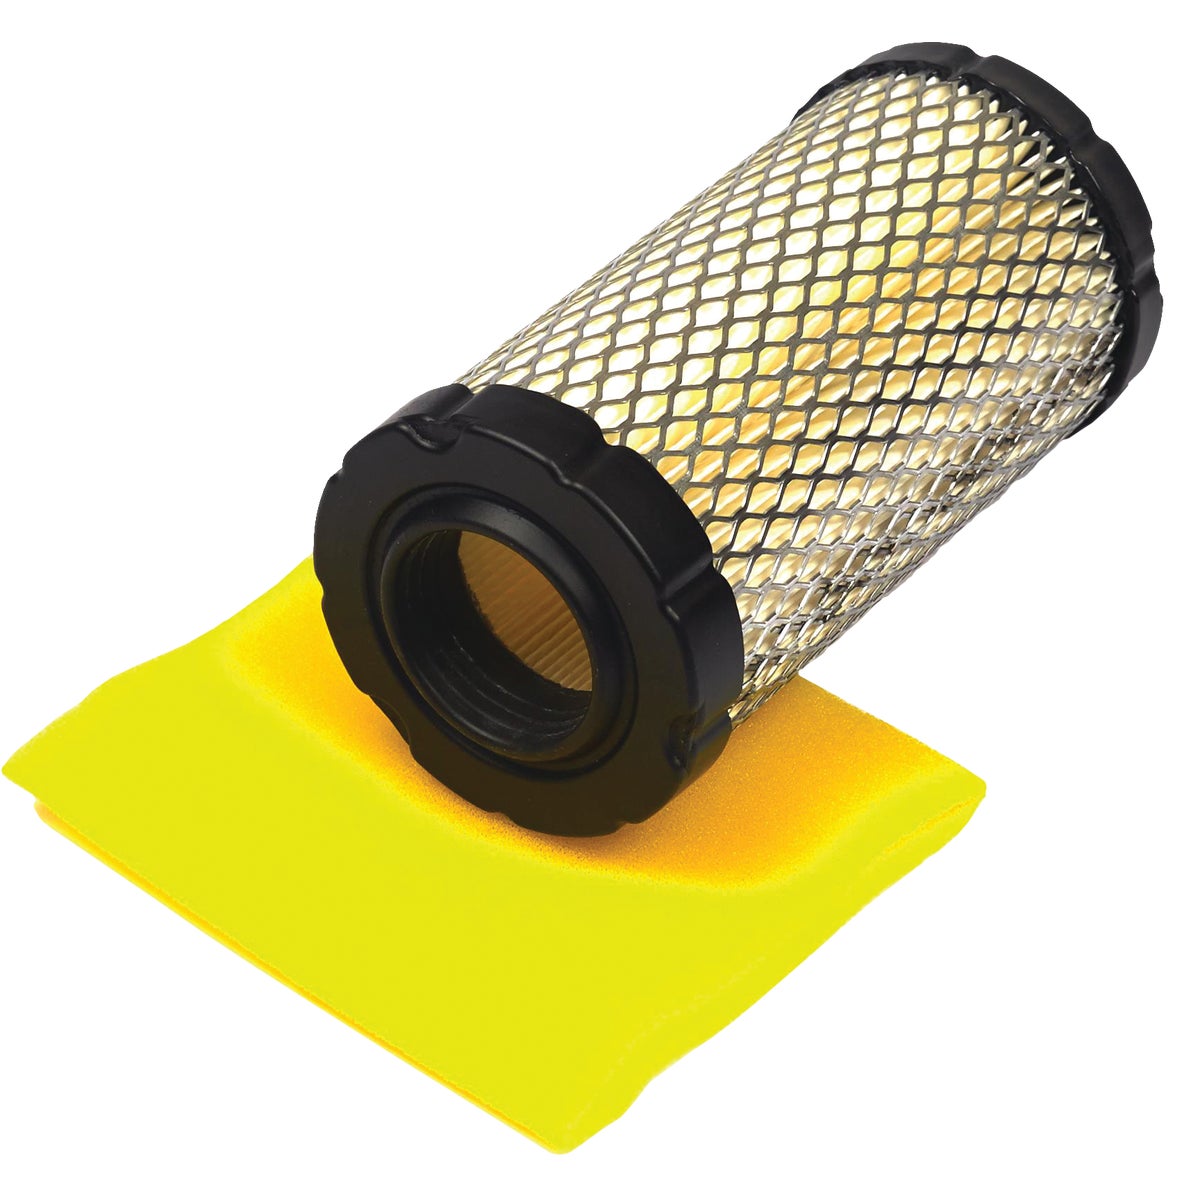 Item 765137, Round style, pleated paper air filter with pre-cleaner provides superior 